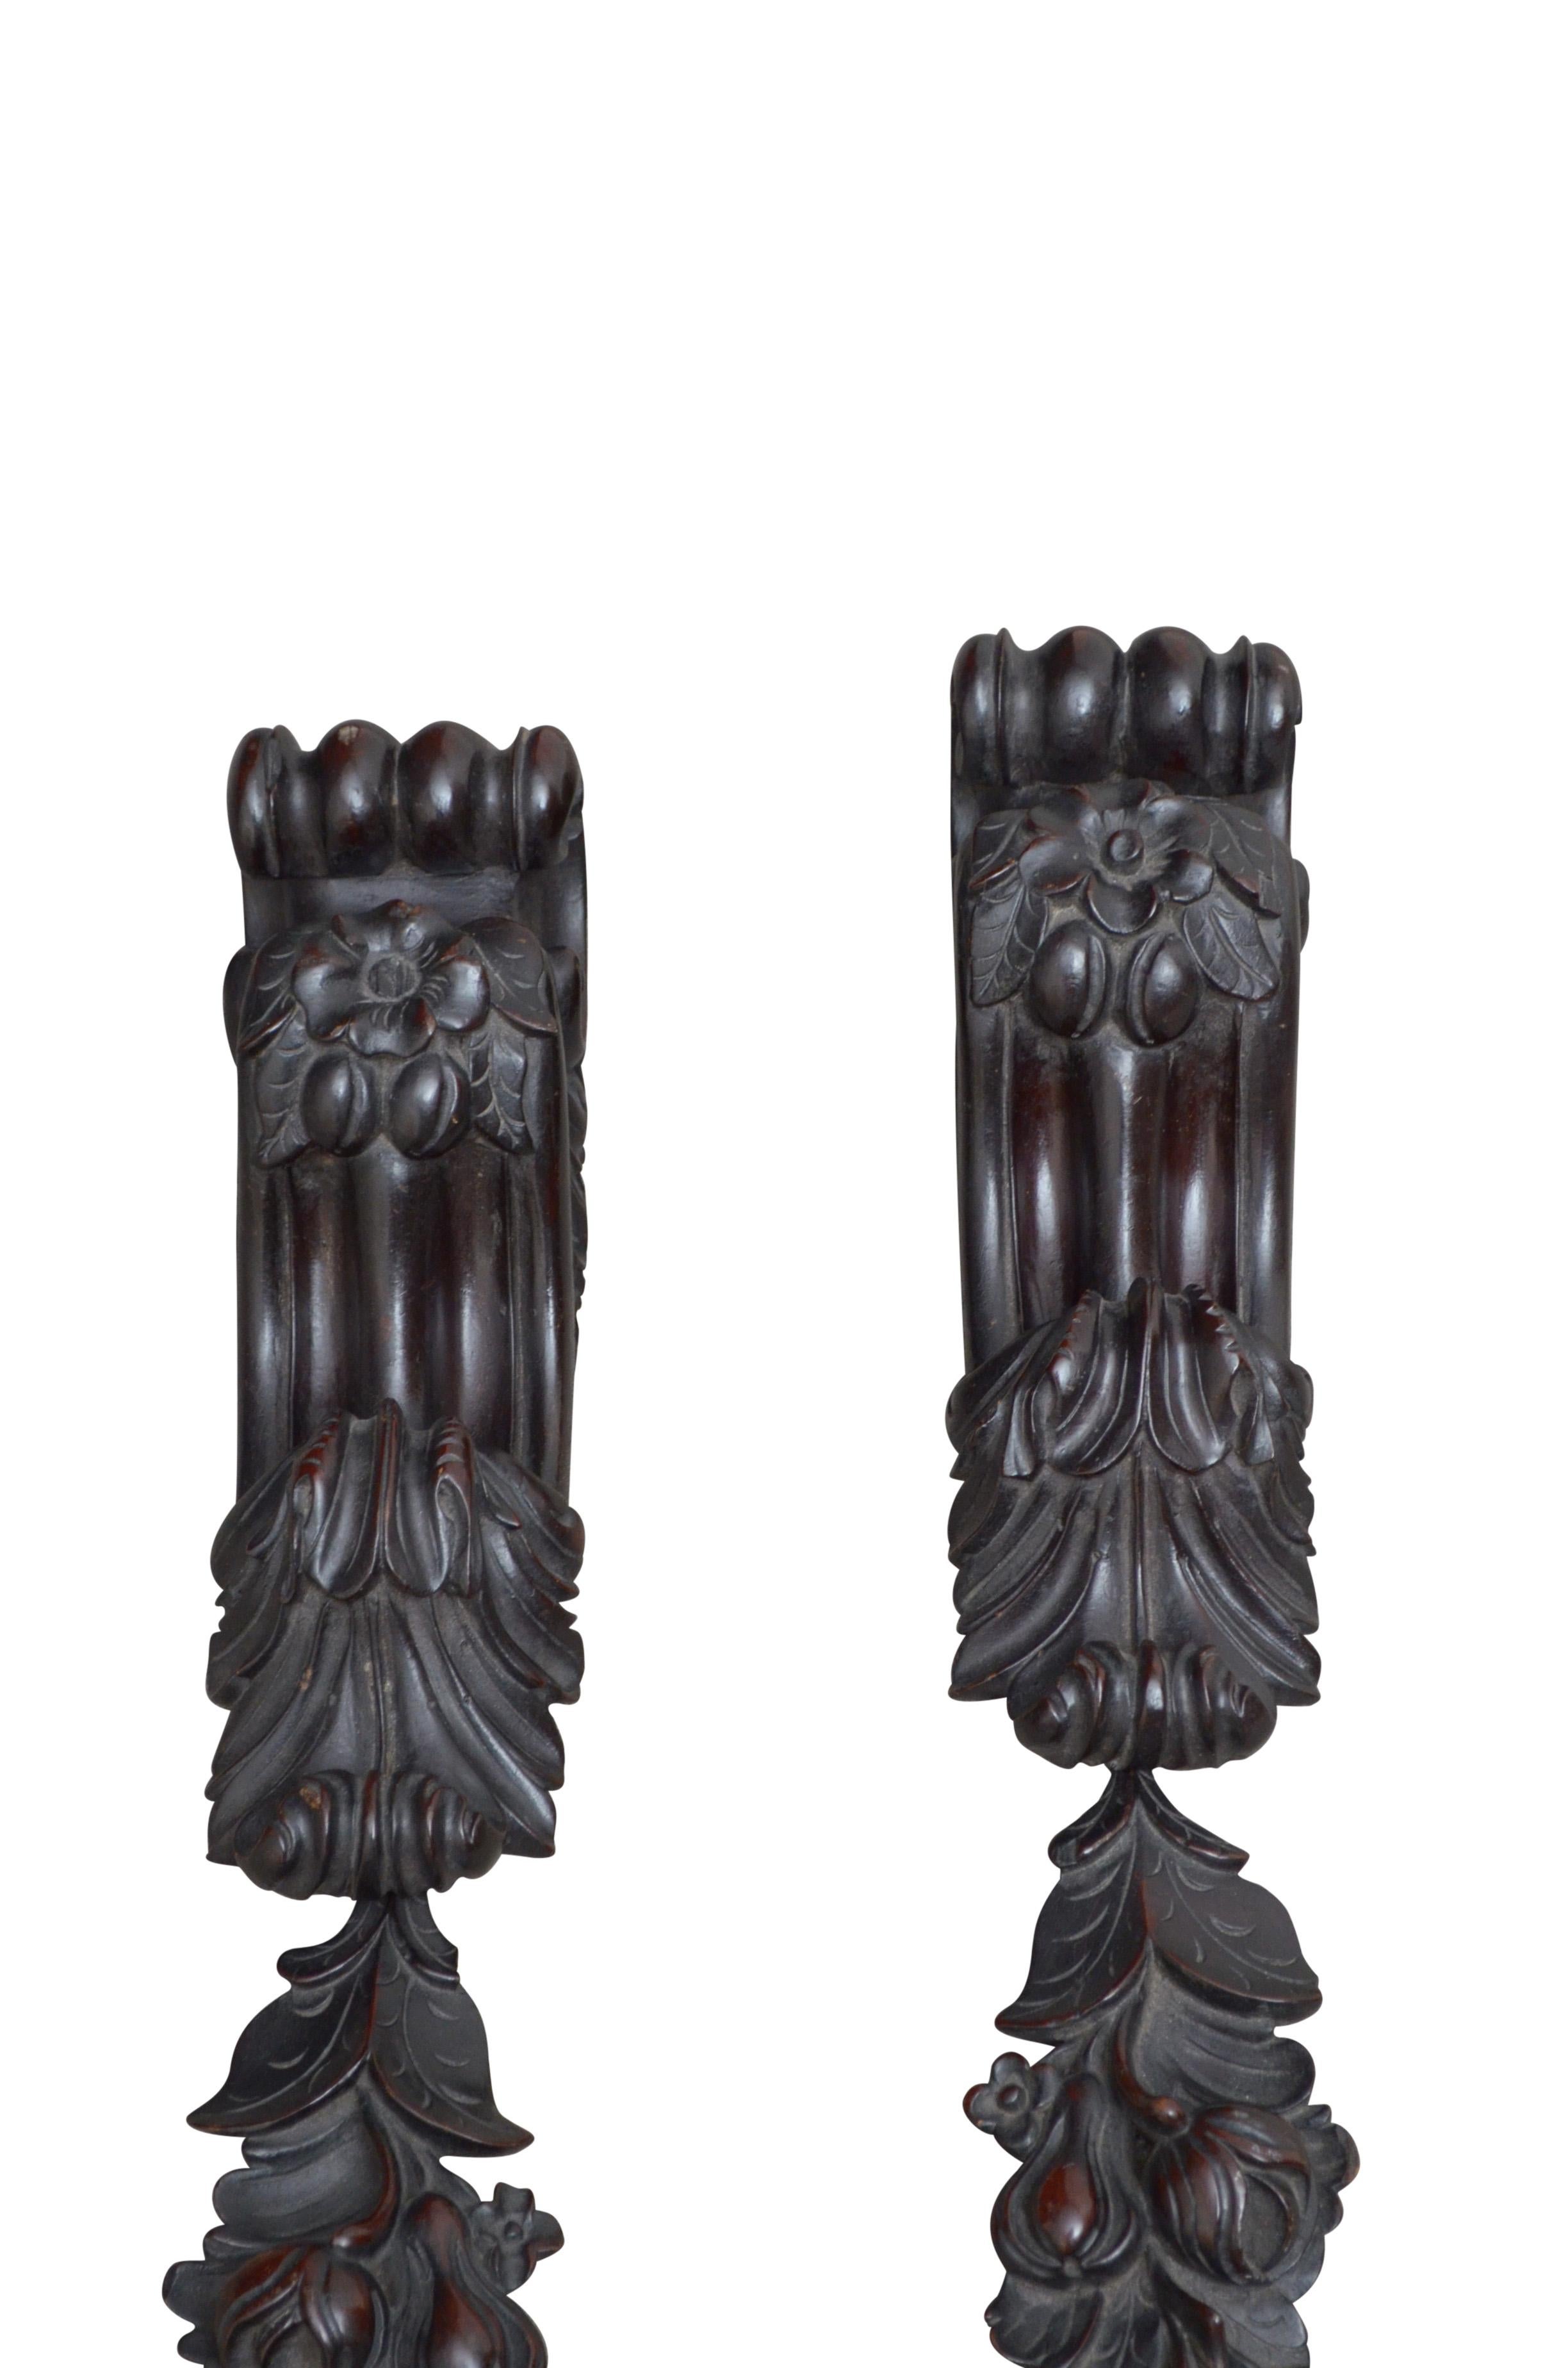 Superb quality pair of mahogany corbels with crisply carved scrolls with leafy motifs and floral and fruit decoration below. All in original condition, retains original finish and patina. c1860
Measures: L 11